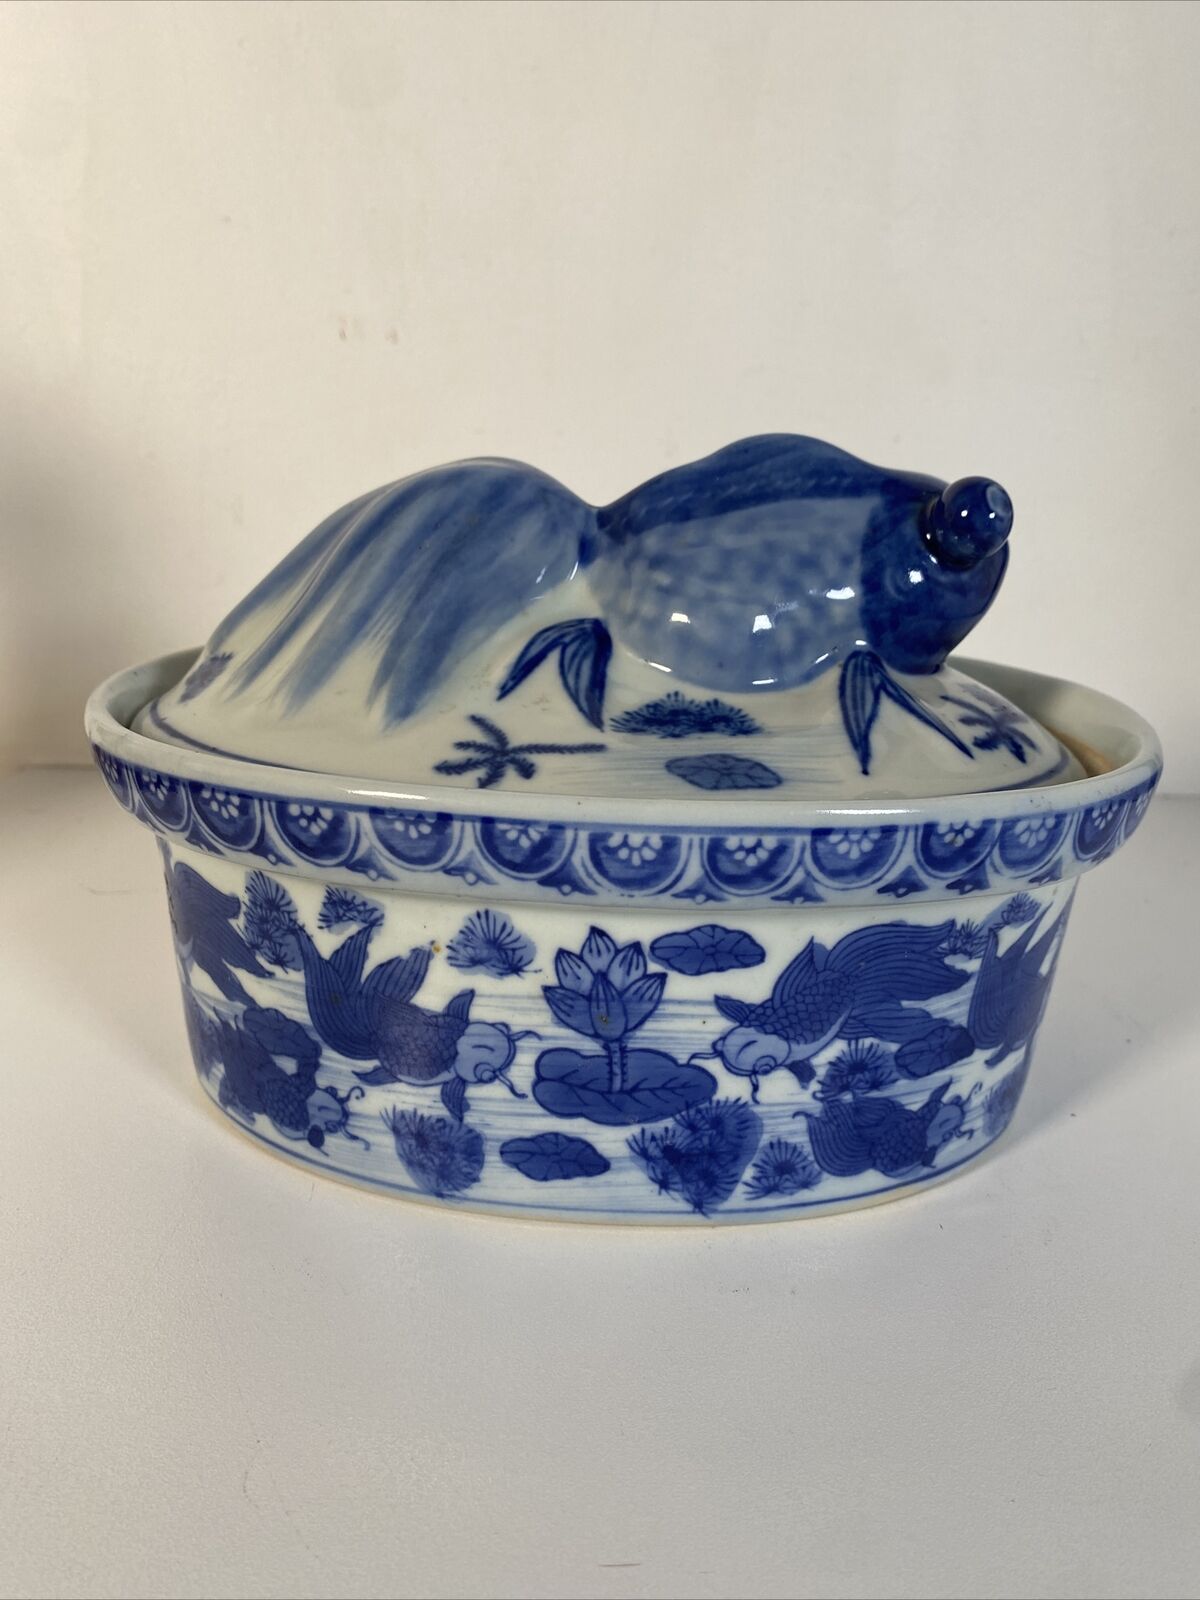 Vintage Blue & White Koi Covered Dish Chinese 9.5” X 7” Casserole Dish With Lid